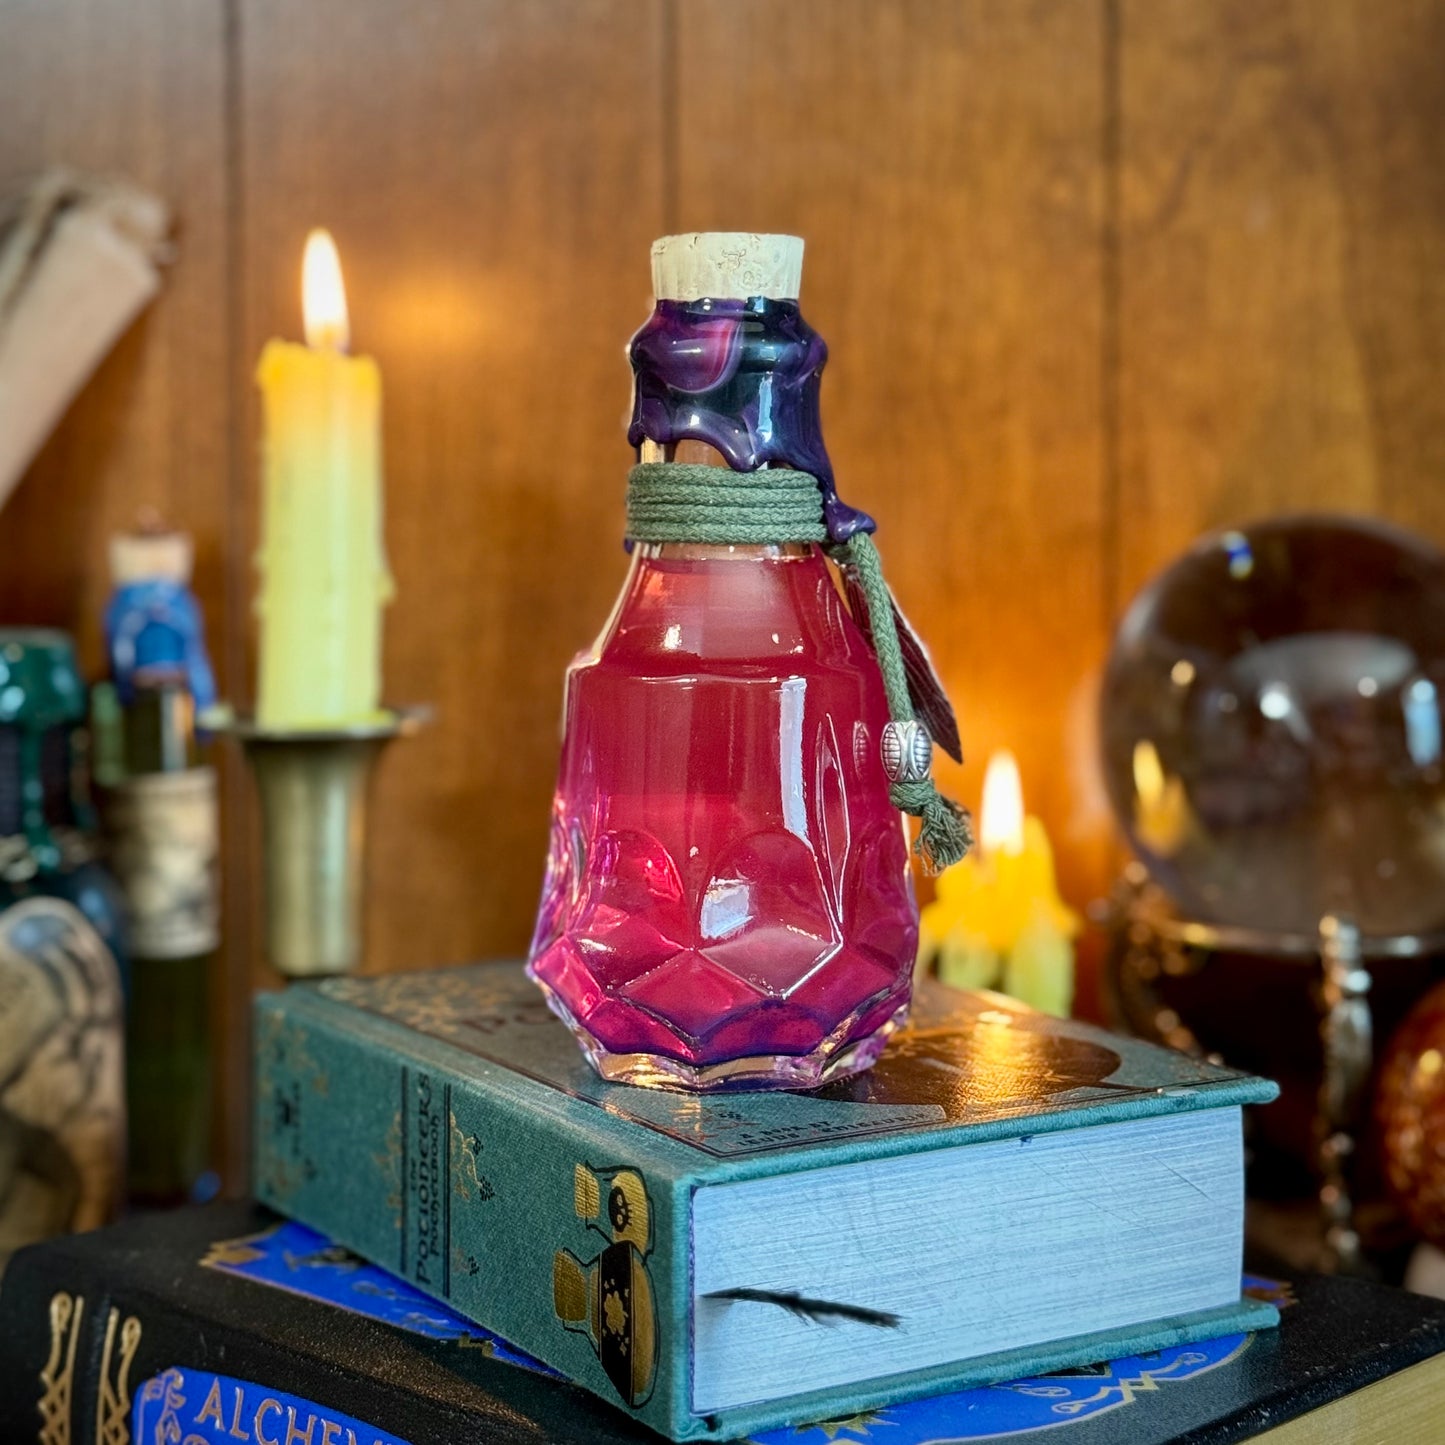 Sleeping Tree Sap, A Color Changing Potion Bottle Prop